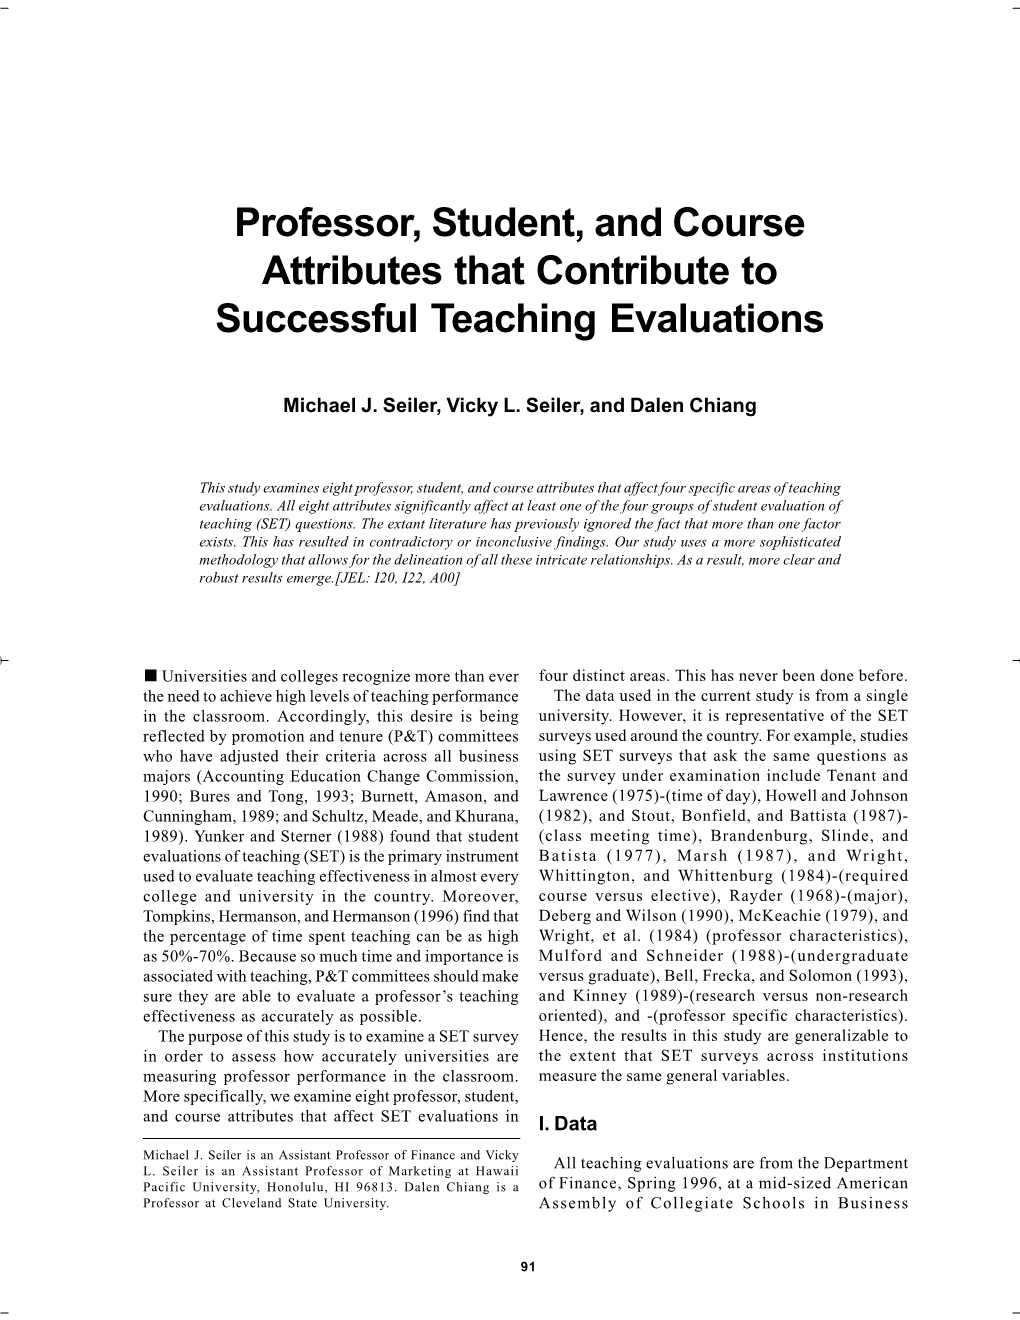 Professor, Student, and Course Attributes That Contribute to Successful Teaching Evaluations